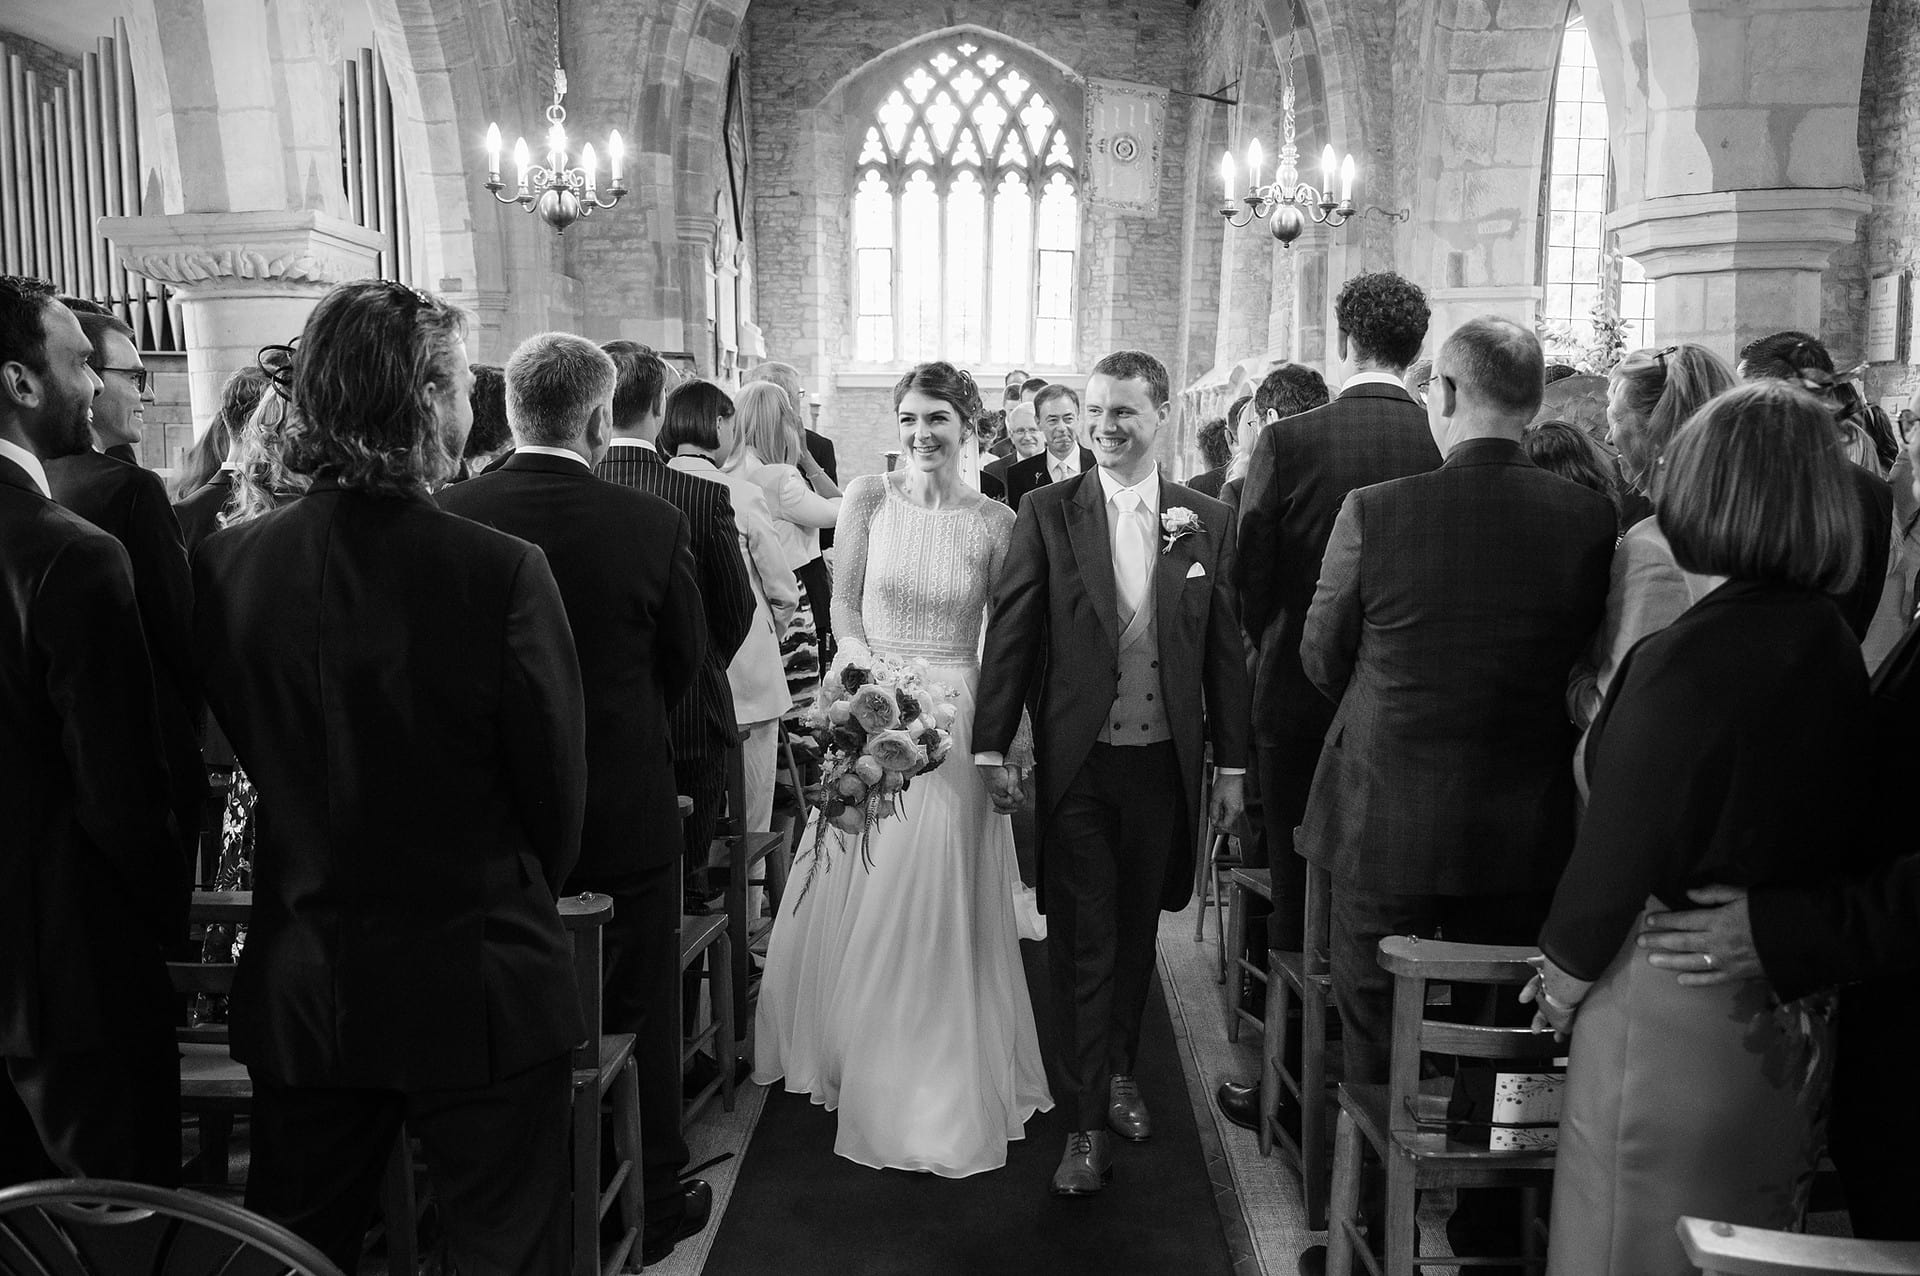 Bride and groom walking down the aisle at Courteenhall church